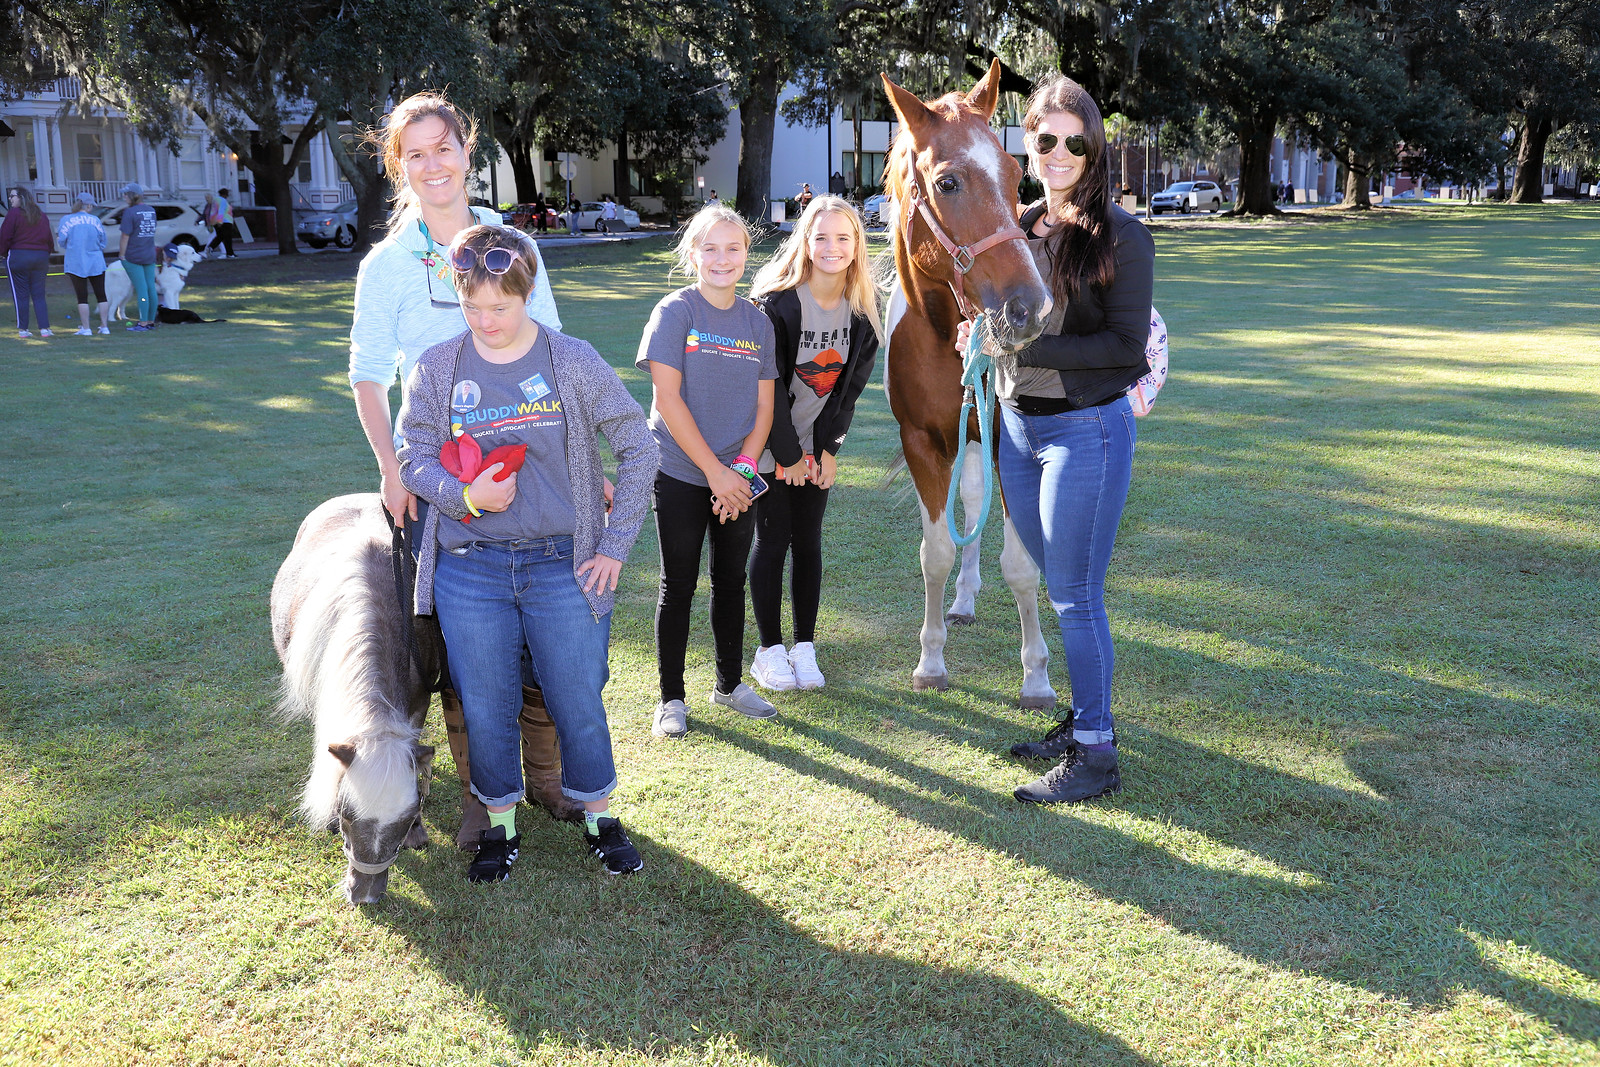 Lowcountry Down Syndrome Society Host 17th Annual Buddy Walk